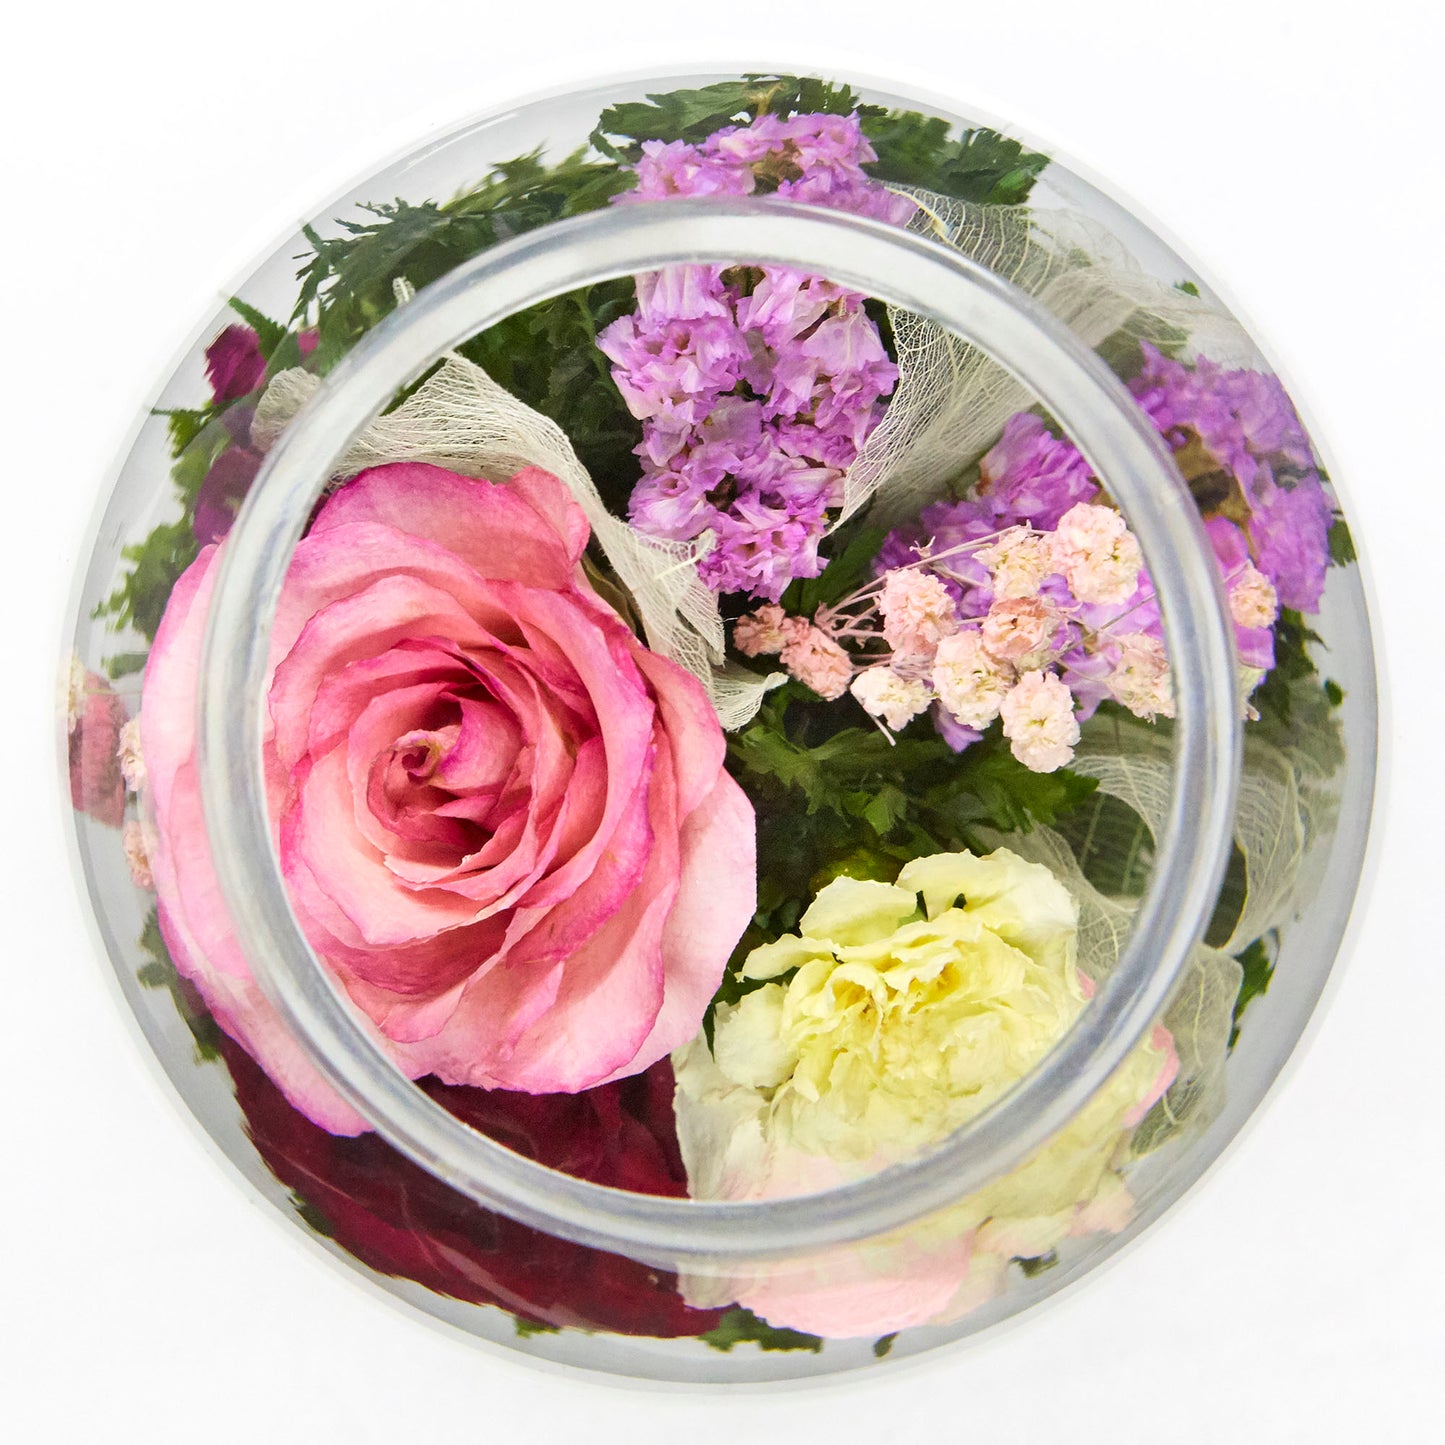 60199 Long-Lasting Purple and Pink Roses and Hydrangea in a Glass Vase